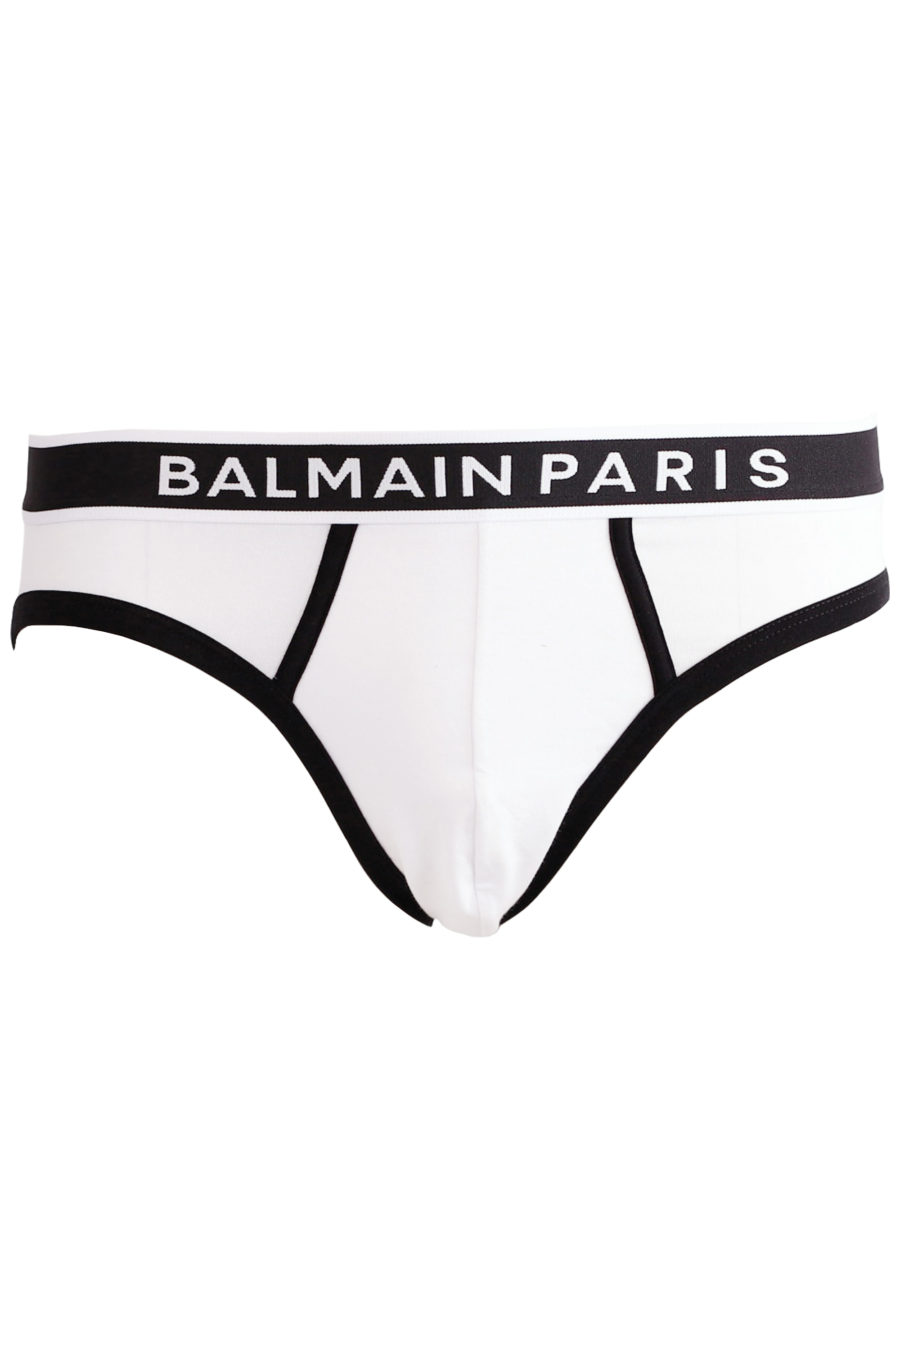 Pack of two white briefs with logo on waistband - f2808a5cc7f75ba5225f0568f12b5d16e546b96c